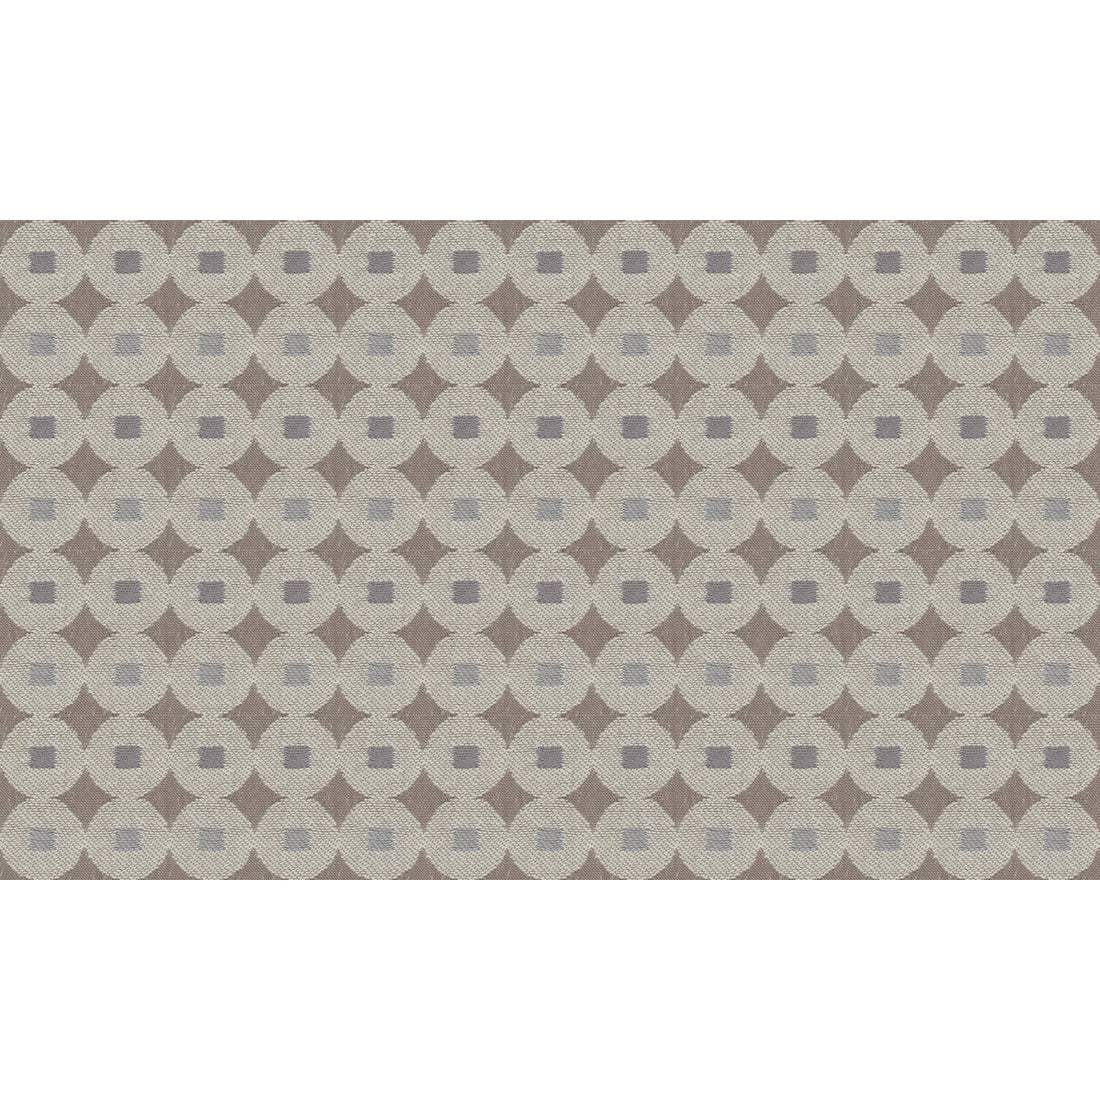 Tiempo fabric in mineral color - pattern 34651.11.0 - by Kravet Contract in the Gis collection